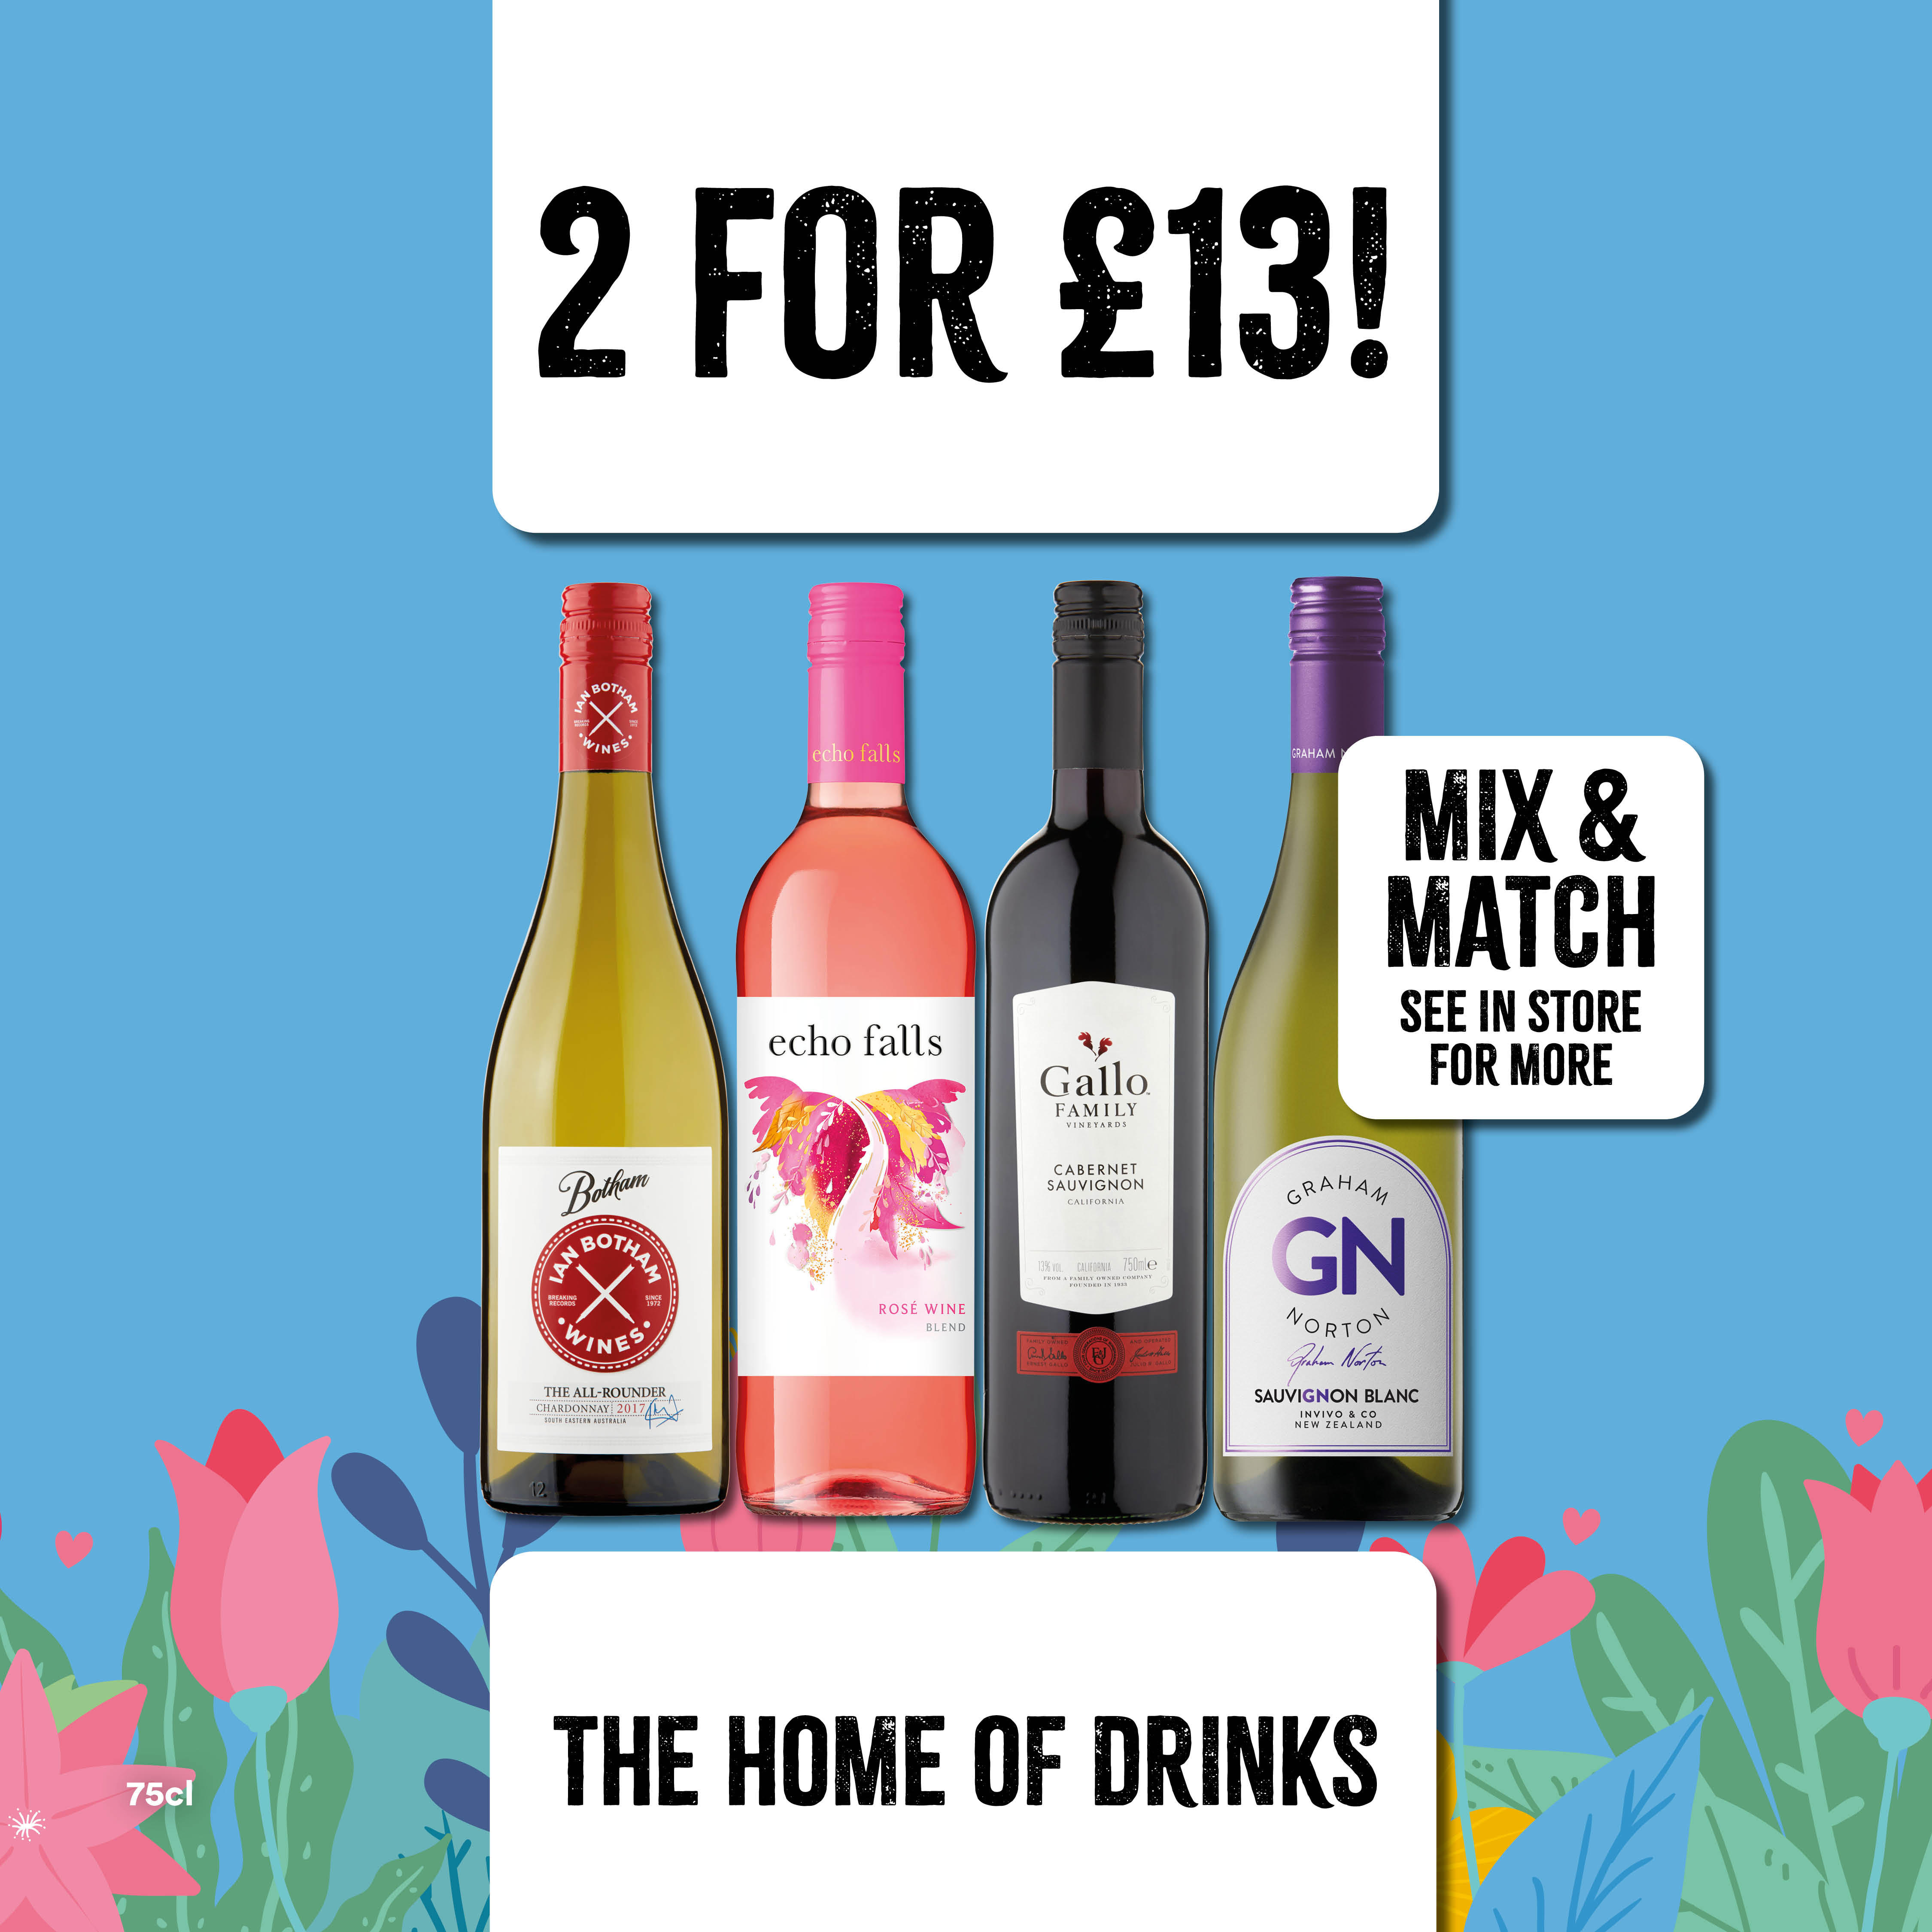 2 for £13 on selected wines Bargain Booze (Upton Priory, Macclesfield) Macclesfield 01625 869004